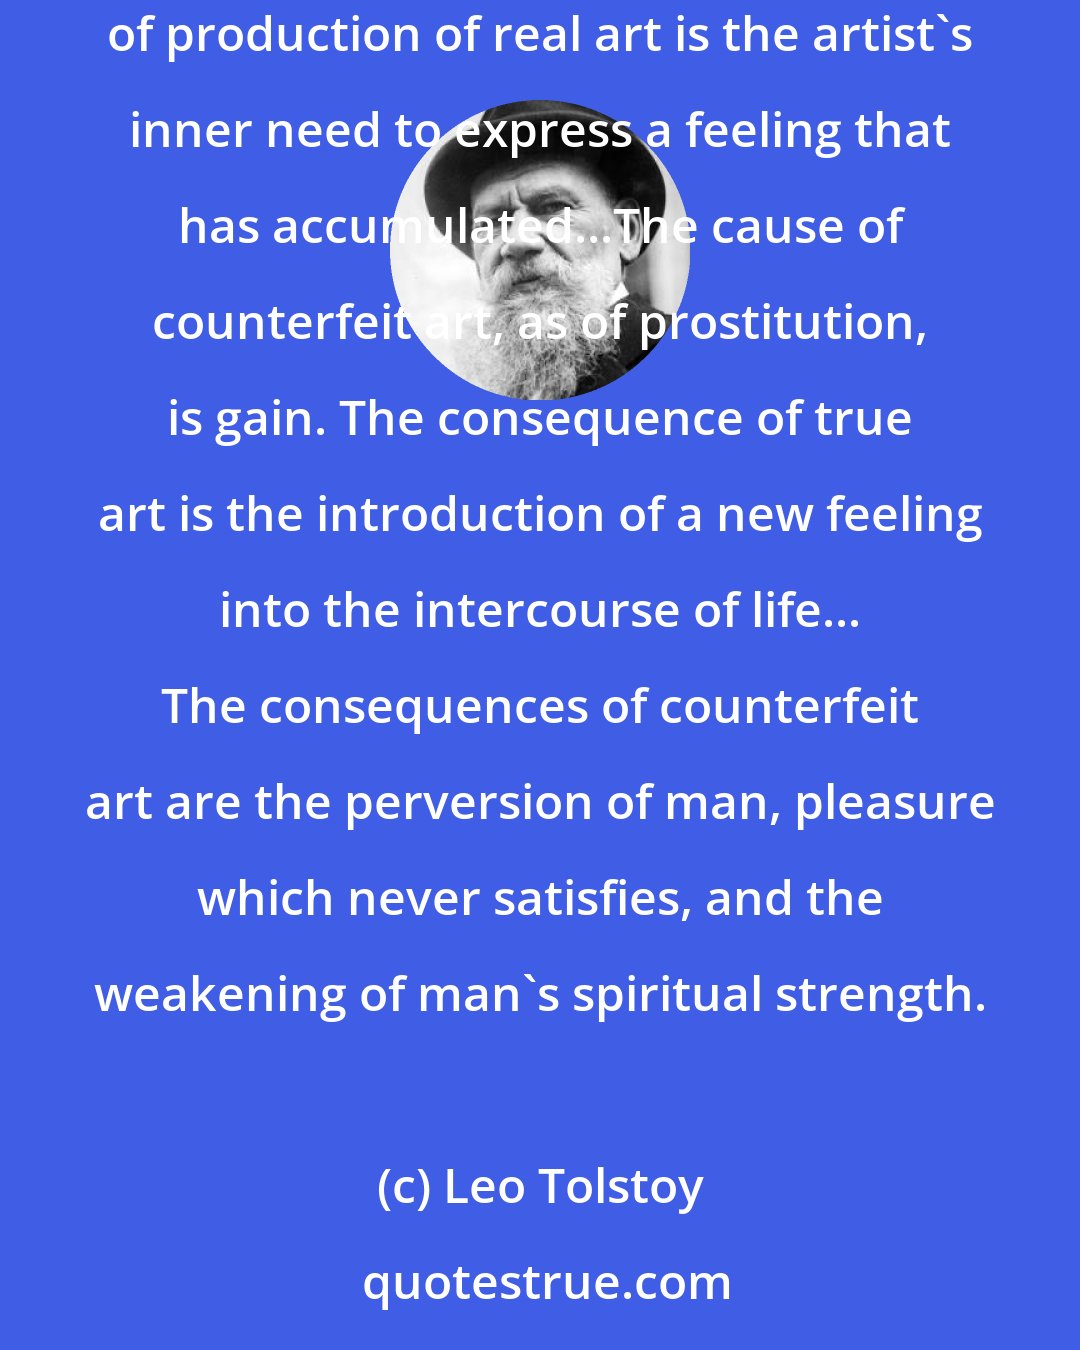 Leo Tolstoy: Real art, like the wife of an affectionate husband, needs no ornaments. But counterfeit art, like a prostitute, must always be decked out. The cause of production of real art is the artist's inner need to express a feeling that has accumulated...The cause of counterfeit art, as of prostitution, is gain. The consequence of true art is the introduction of a new feeling into the intercourse of life... The consequences of counterfeit art are the perversion of man, pleasure which never satisfies, and the weakening of man's spiritual strength.